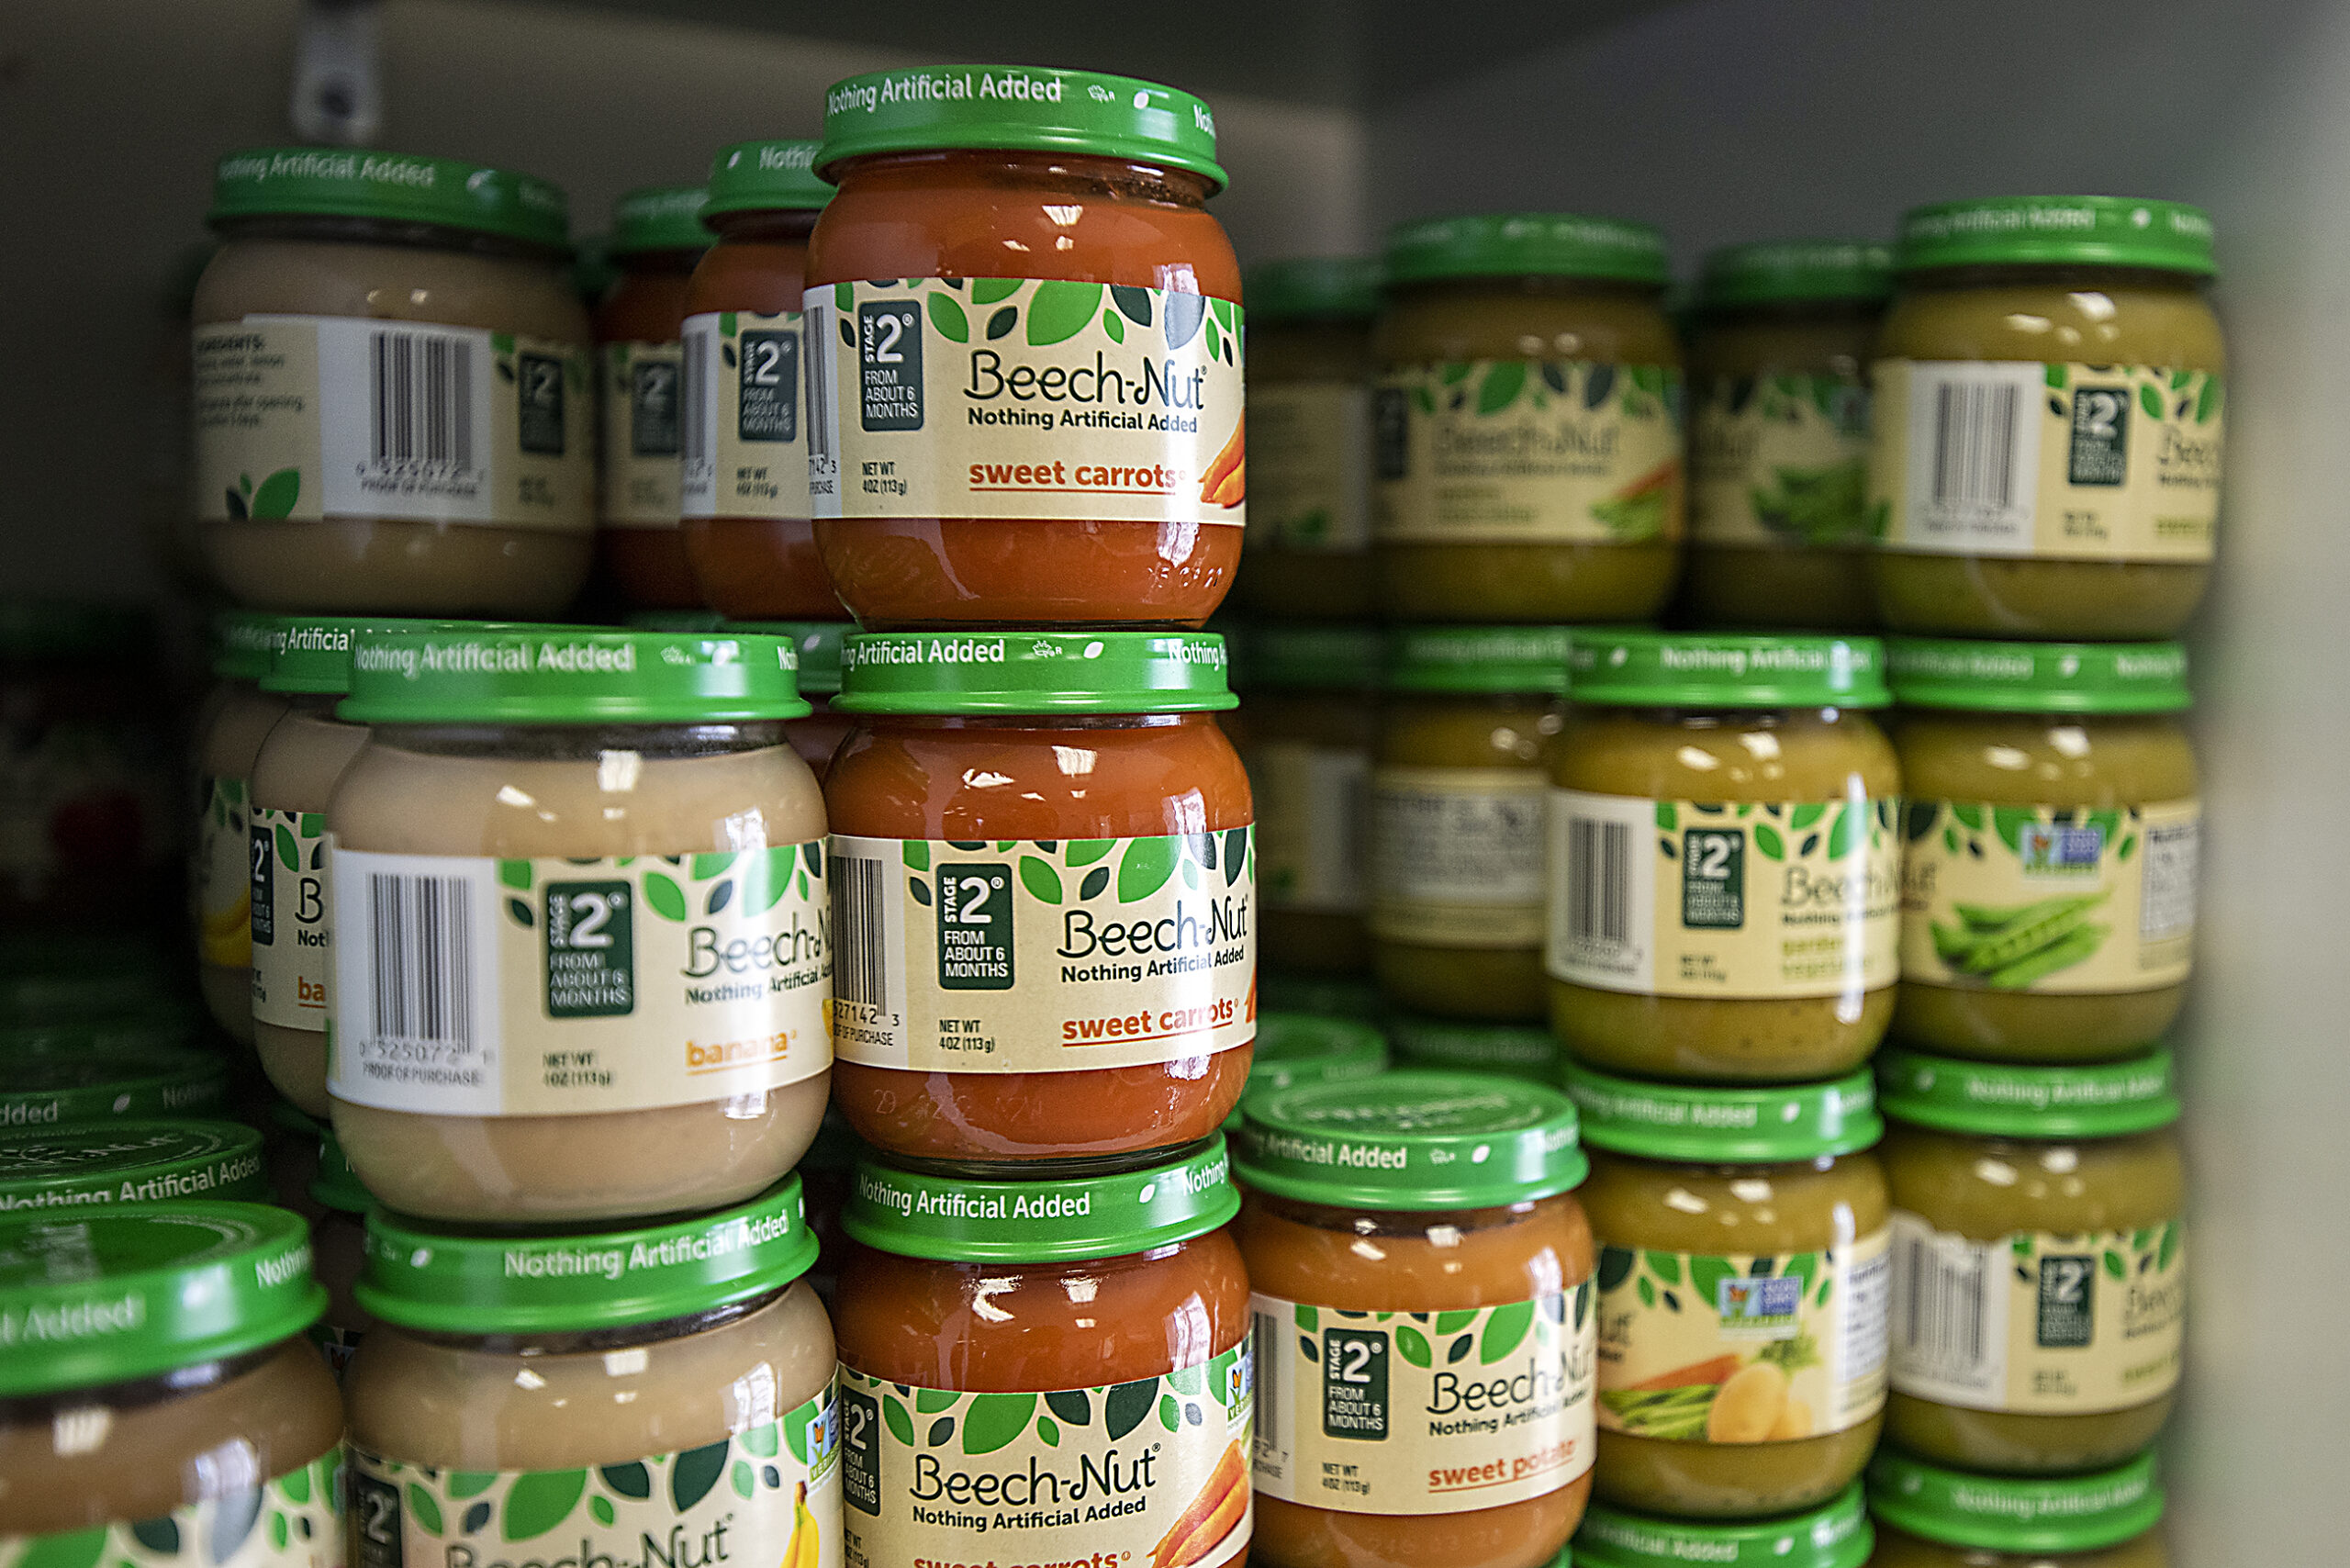 Jars of tan, orange, and green baby food are stacked on a shelf.